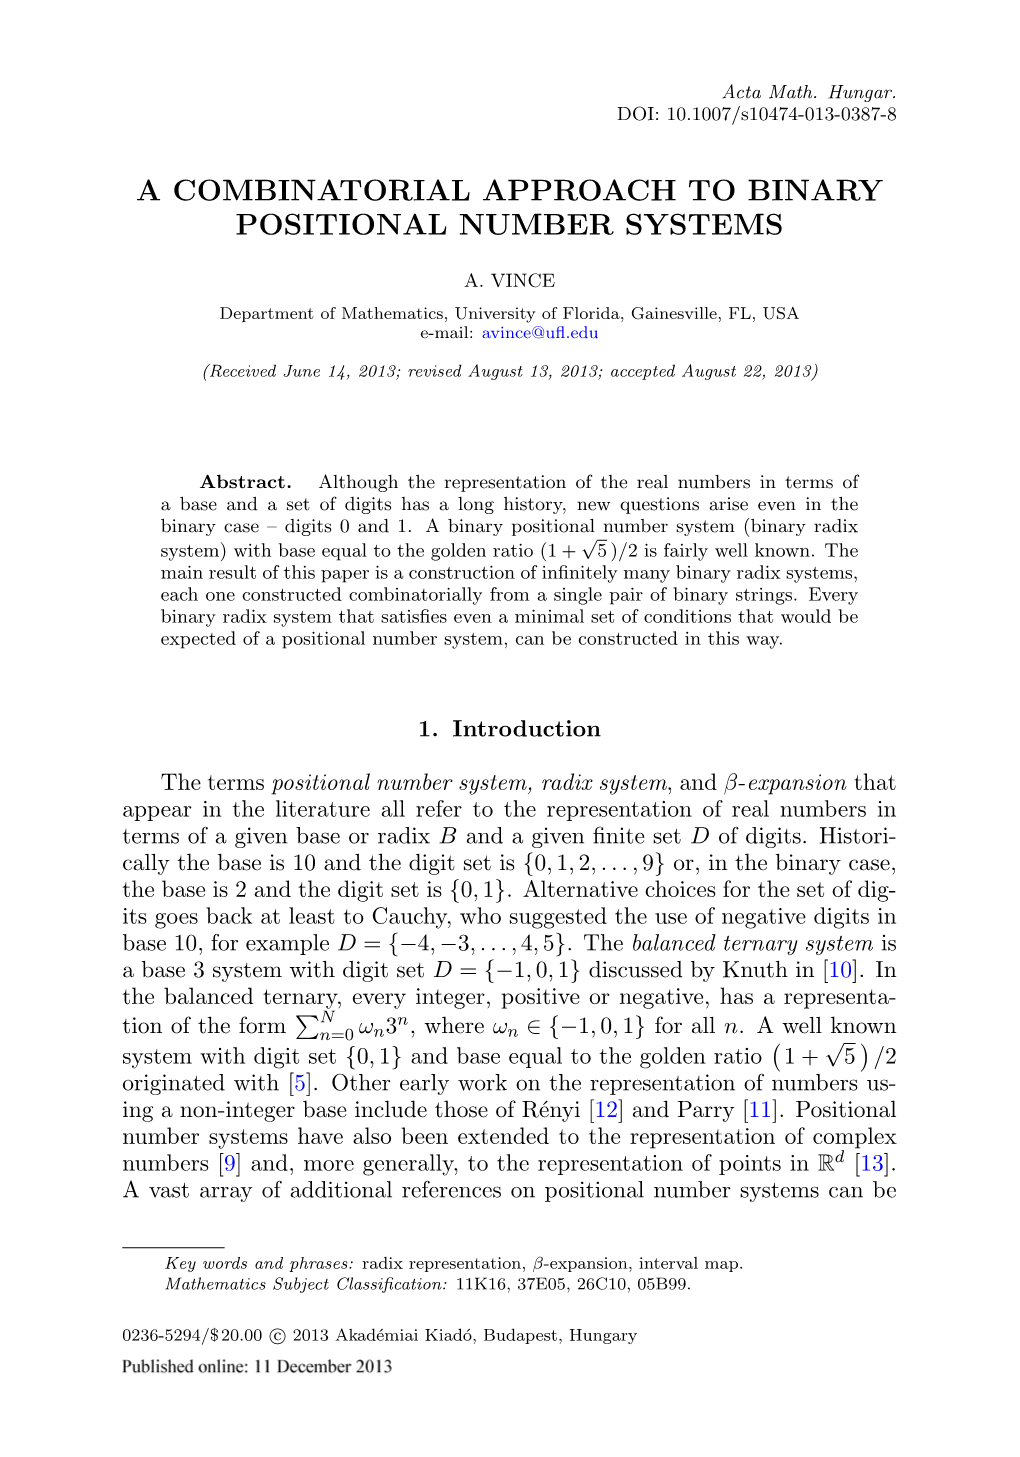 A Combinatorial Approach to Binary Positional Number Systems